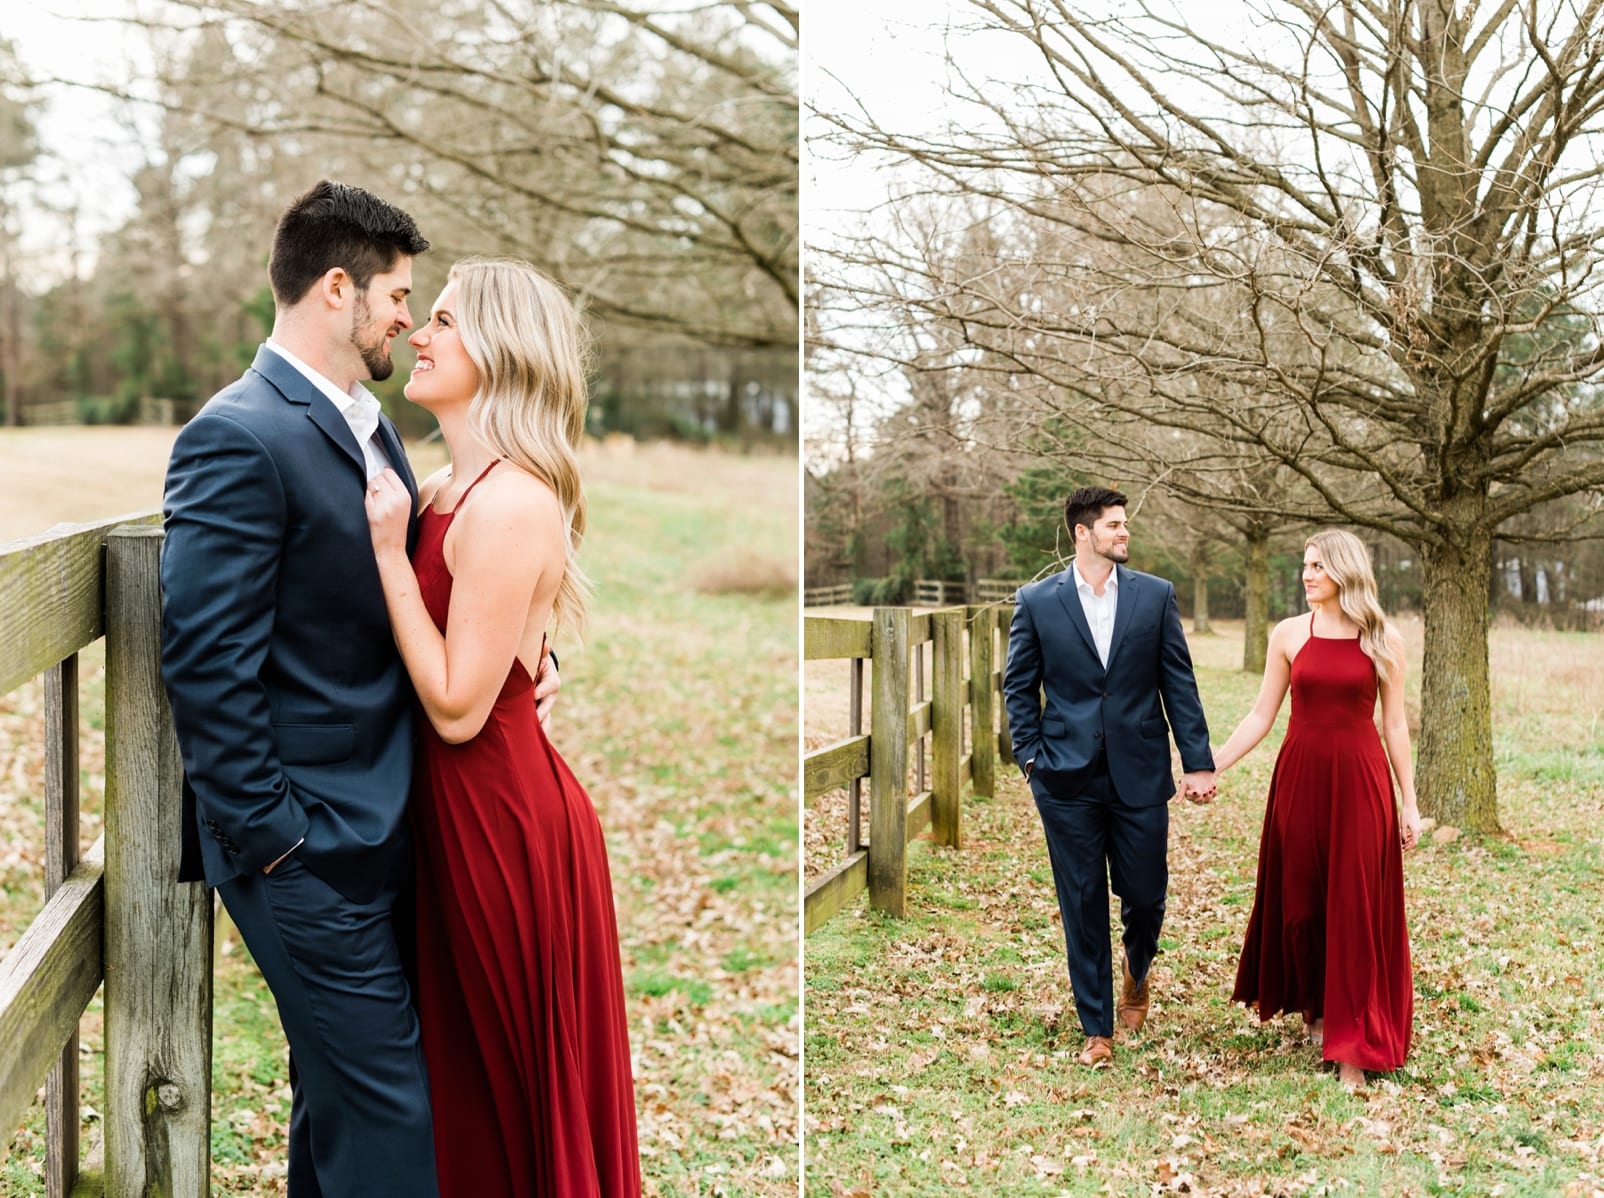 Raleigh engagement portraits of the couple walking hand in hand through a field with a wooden fence photo